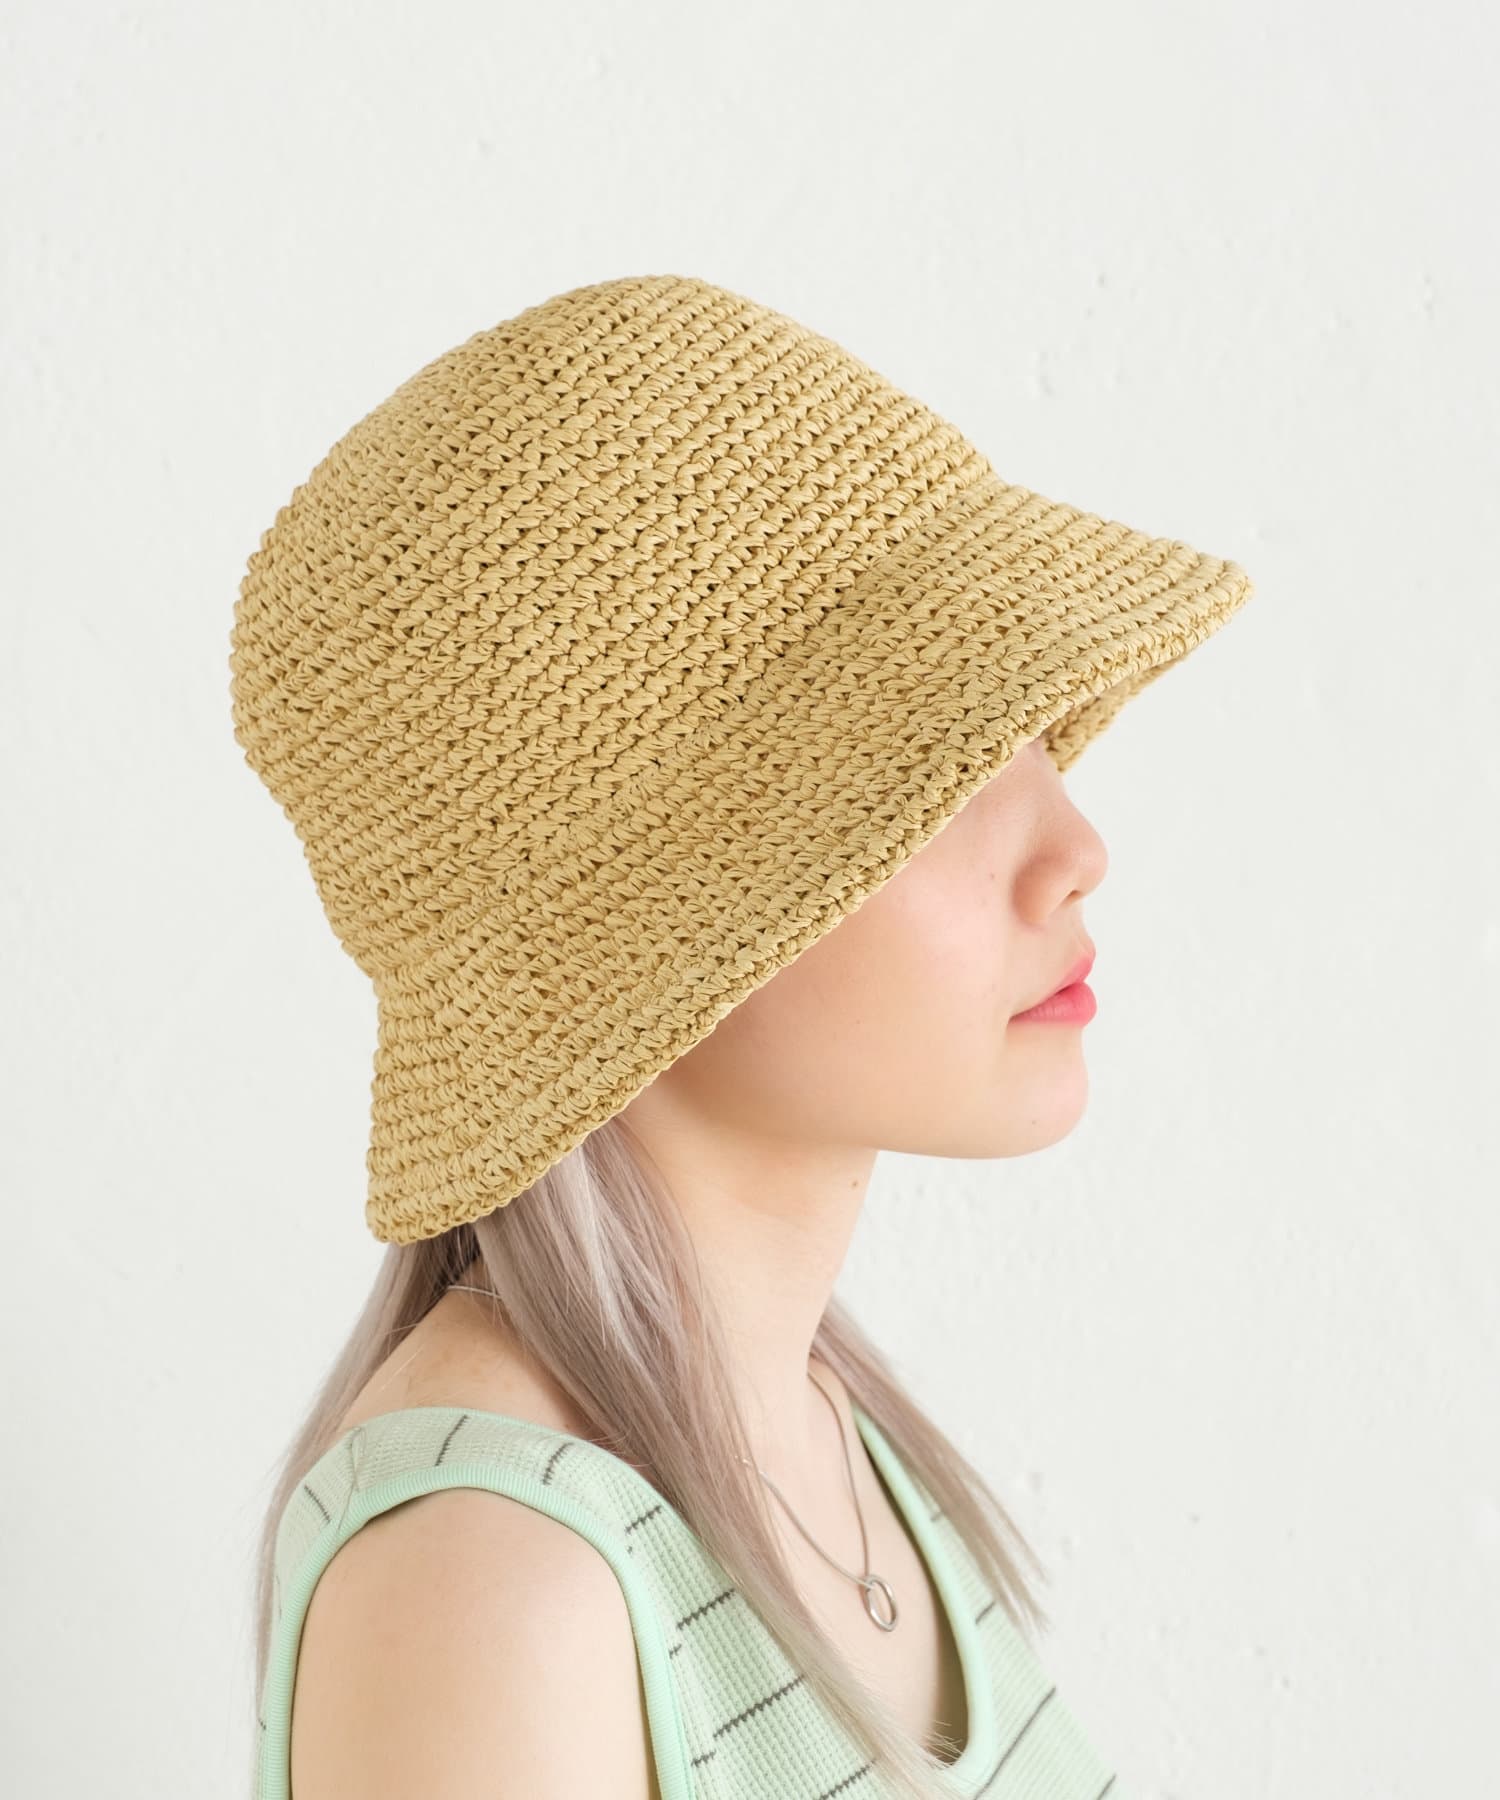 OUTLET(アウトレット) 【Kastane】HAND KNITTING PAPER HAT